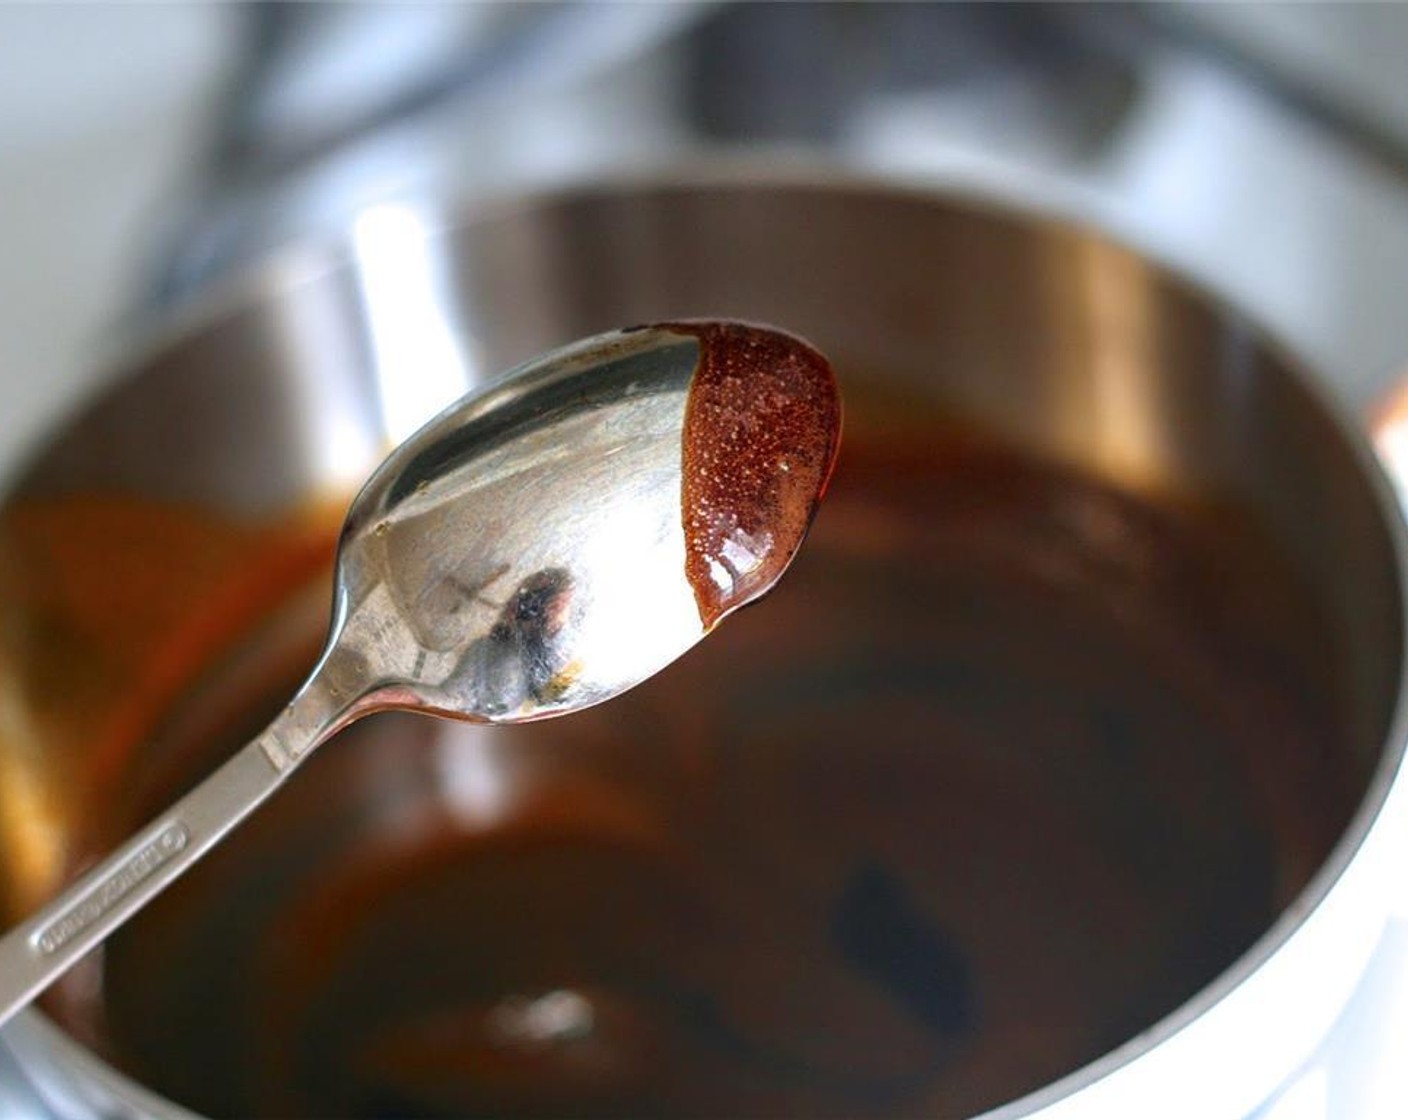 step 1 Combine Soy Sauce (1 Tbsp), Maple Syrup (2 Tbsp) and Balsamic Vinegar (1 cup) in a small sauce pan. Bring to a simmer and reduce by half, or until mixture coats the back of a spoon. Take care not to burn it by stirring often.